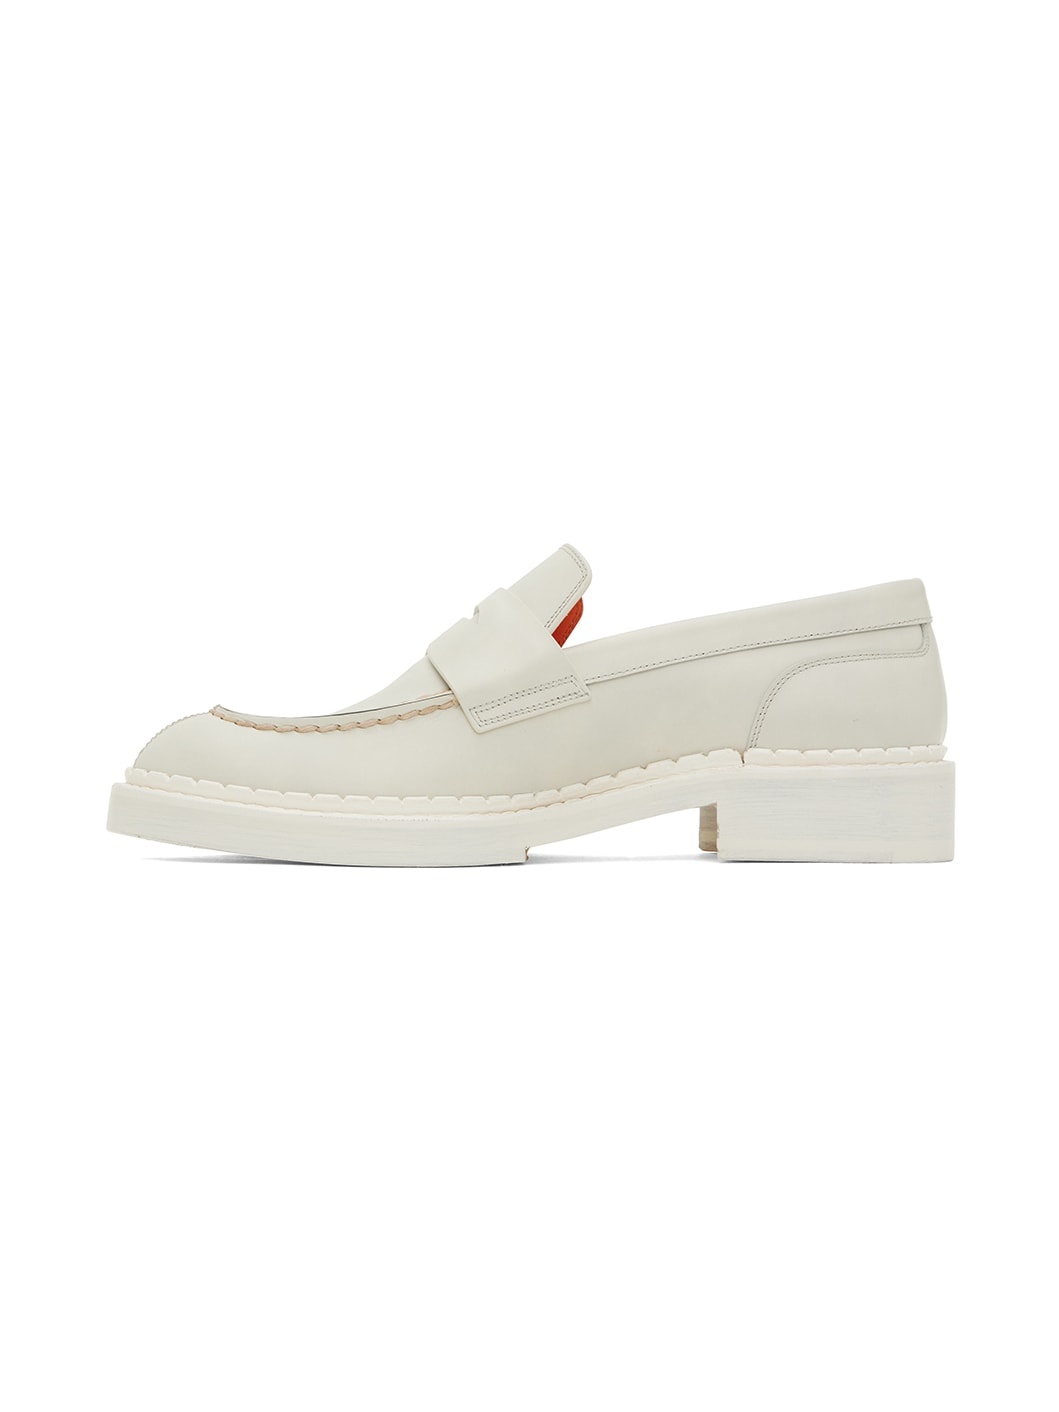 Off-White Leather Loafers - 3